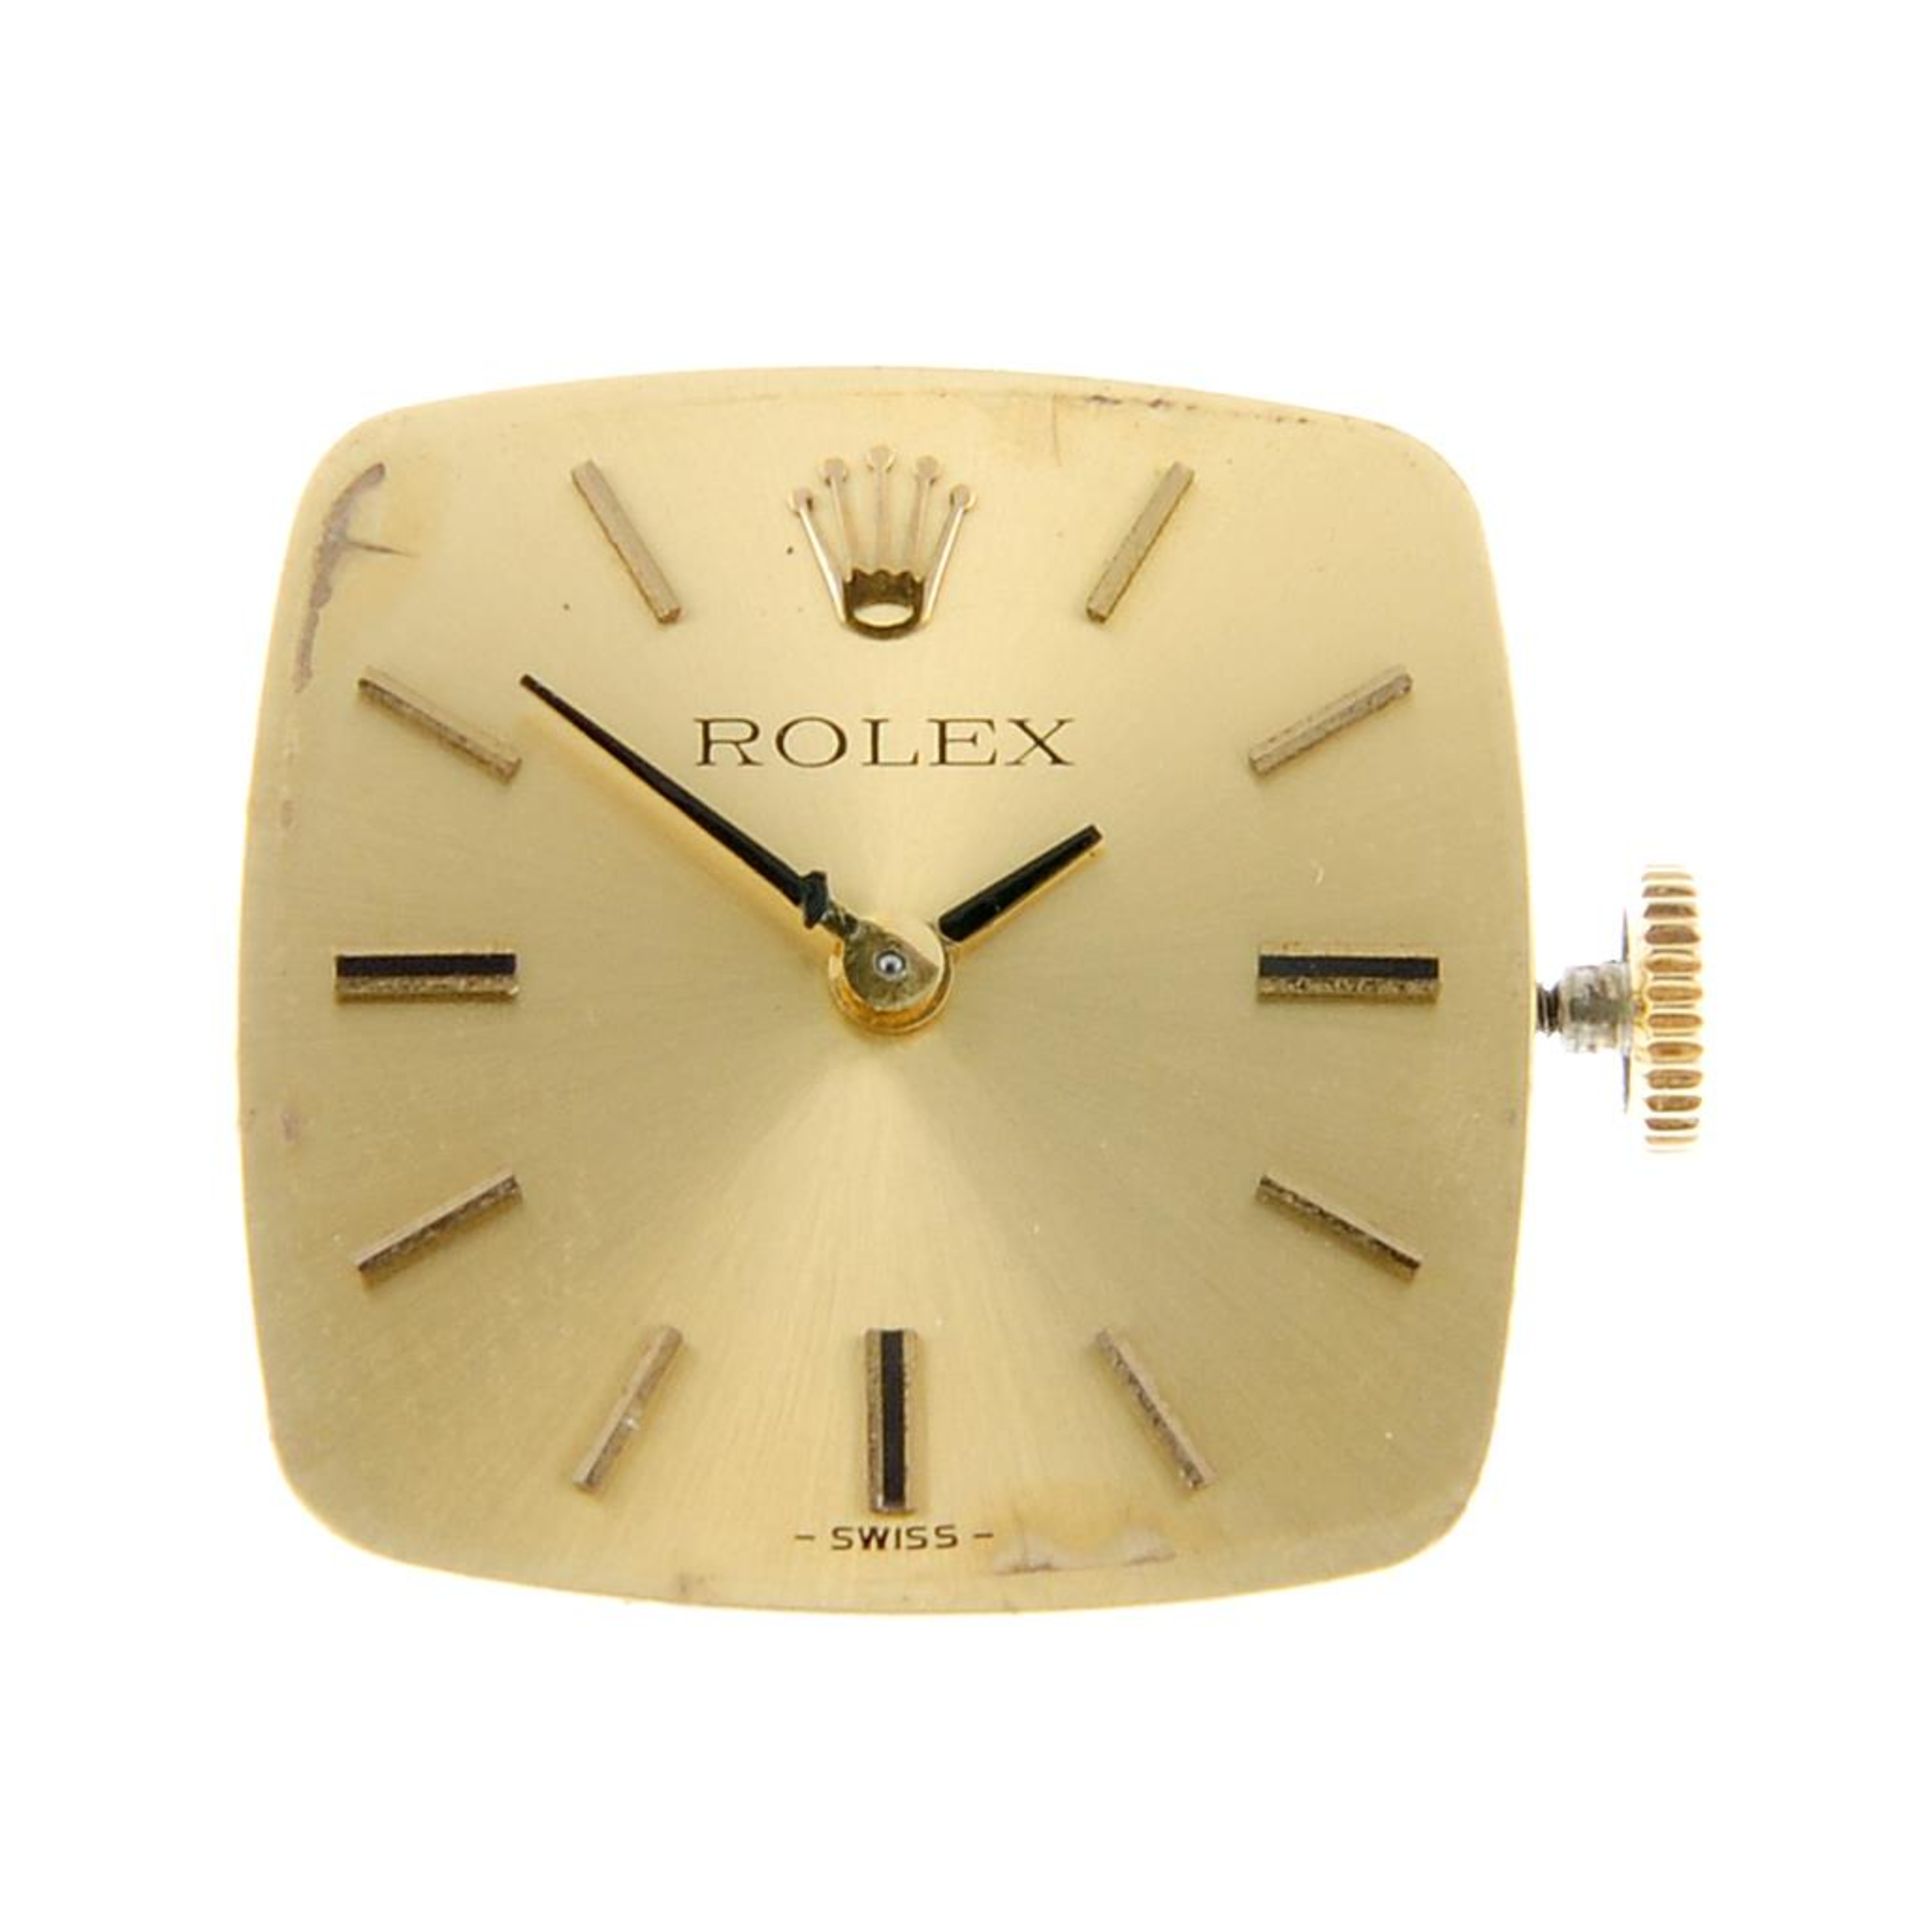 ROLEX - a calibre 1400 watch movement with dial and hands.